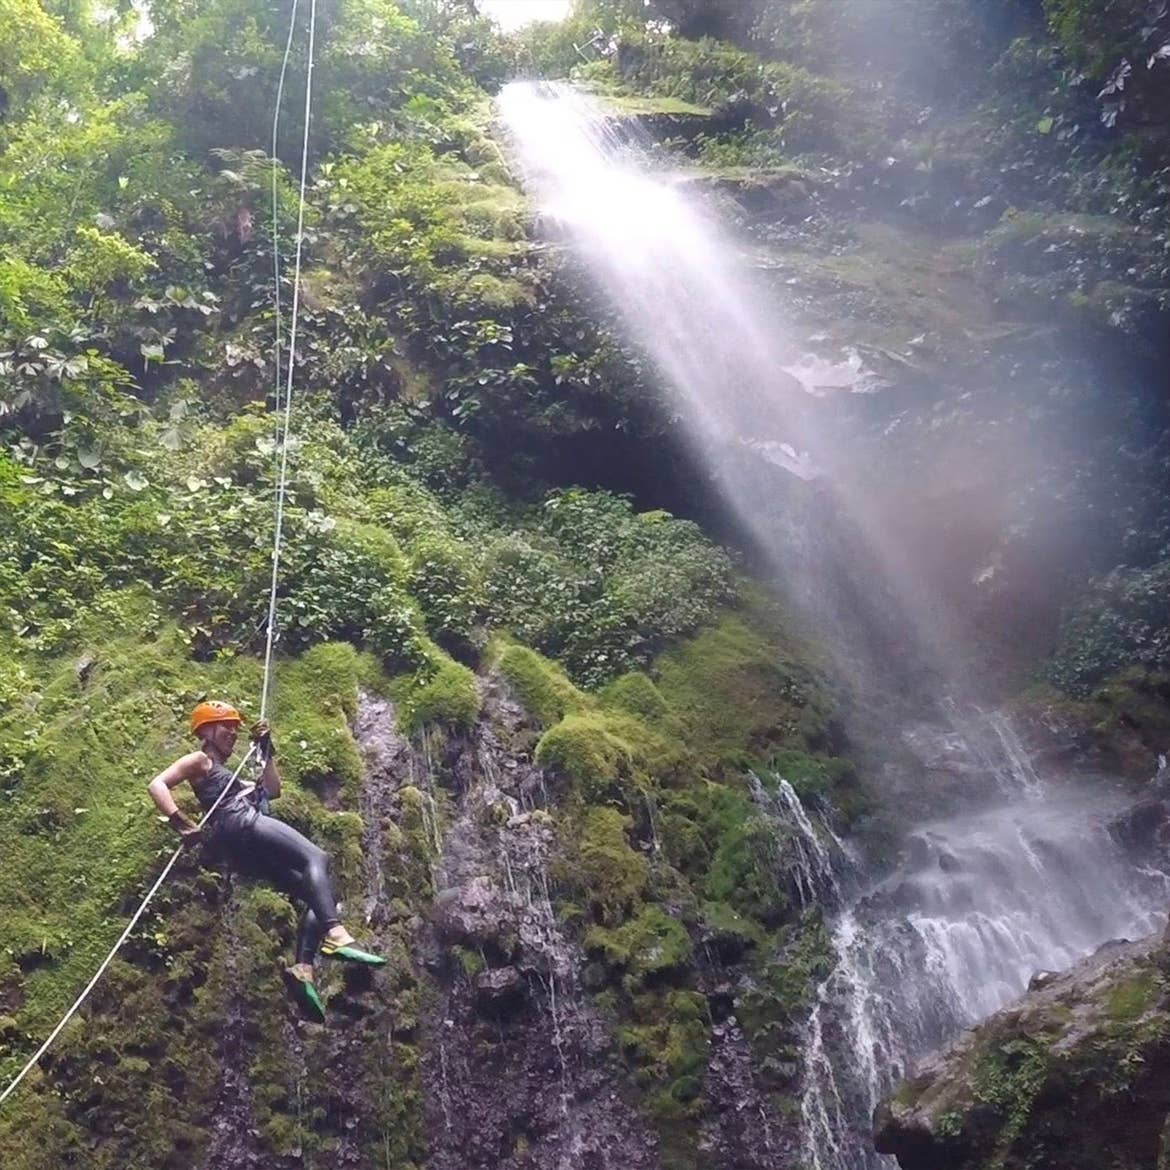 Featured contributor, Tiffany rappelling down a waterfall in Costa Rica.